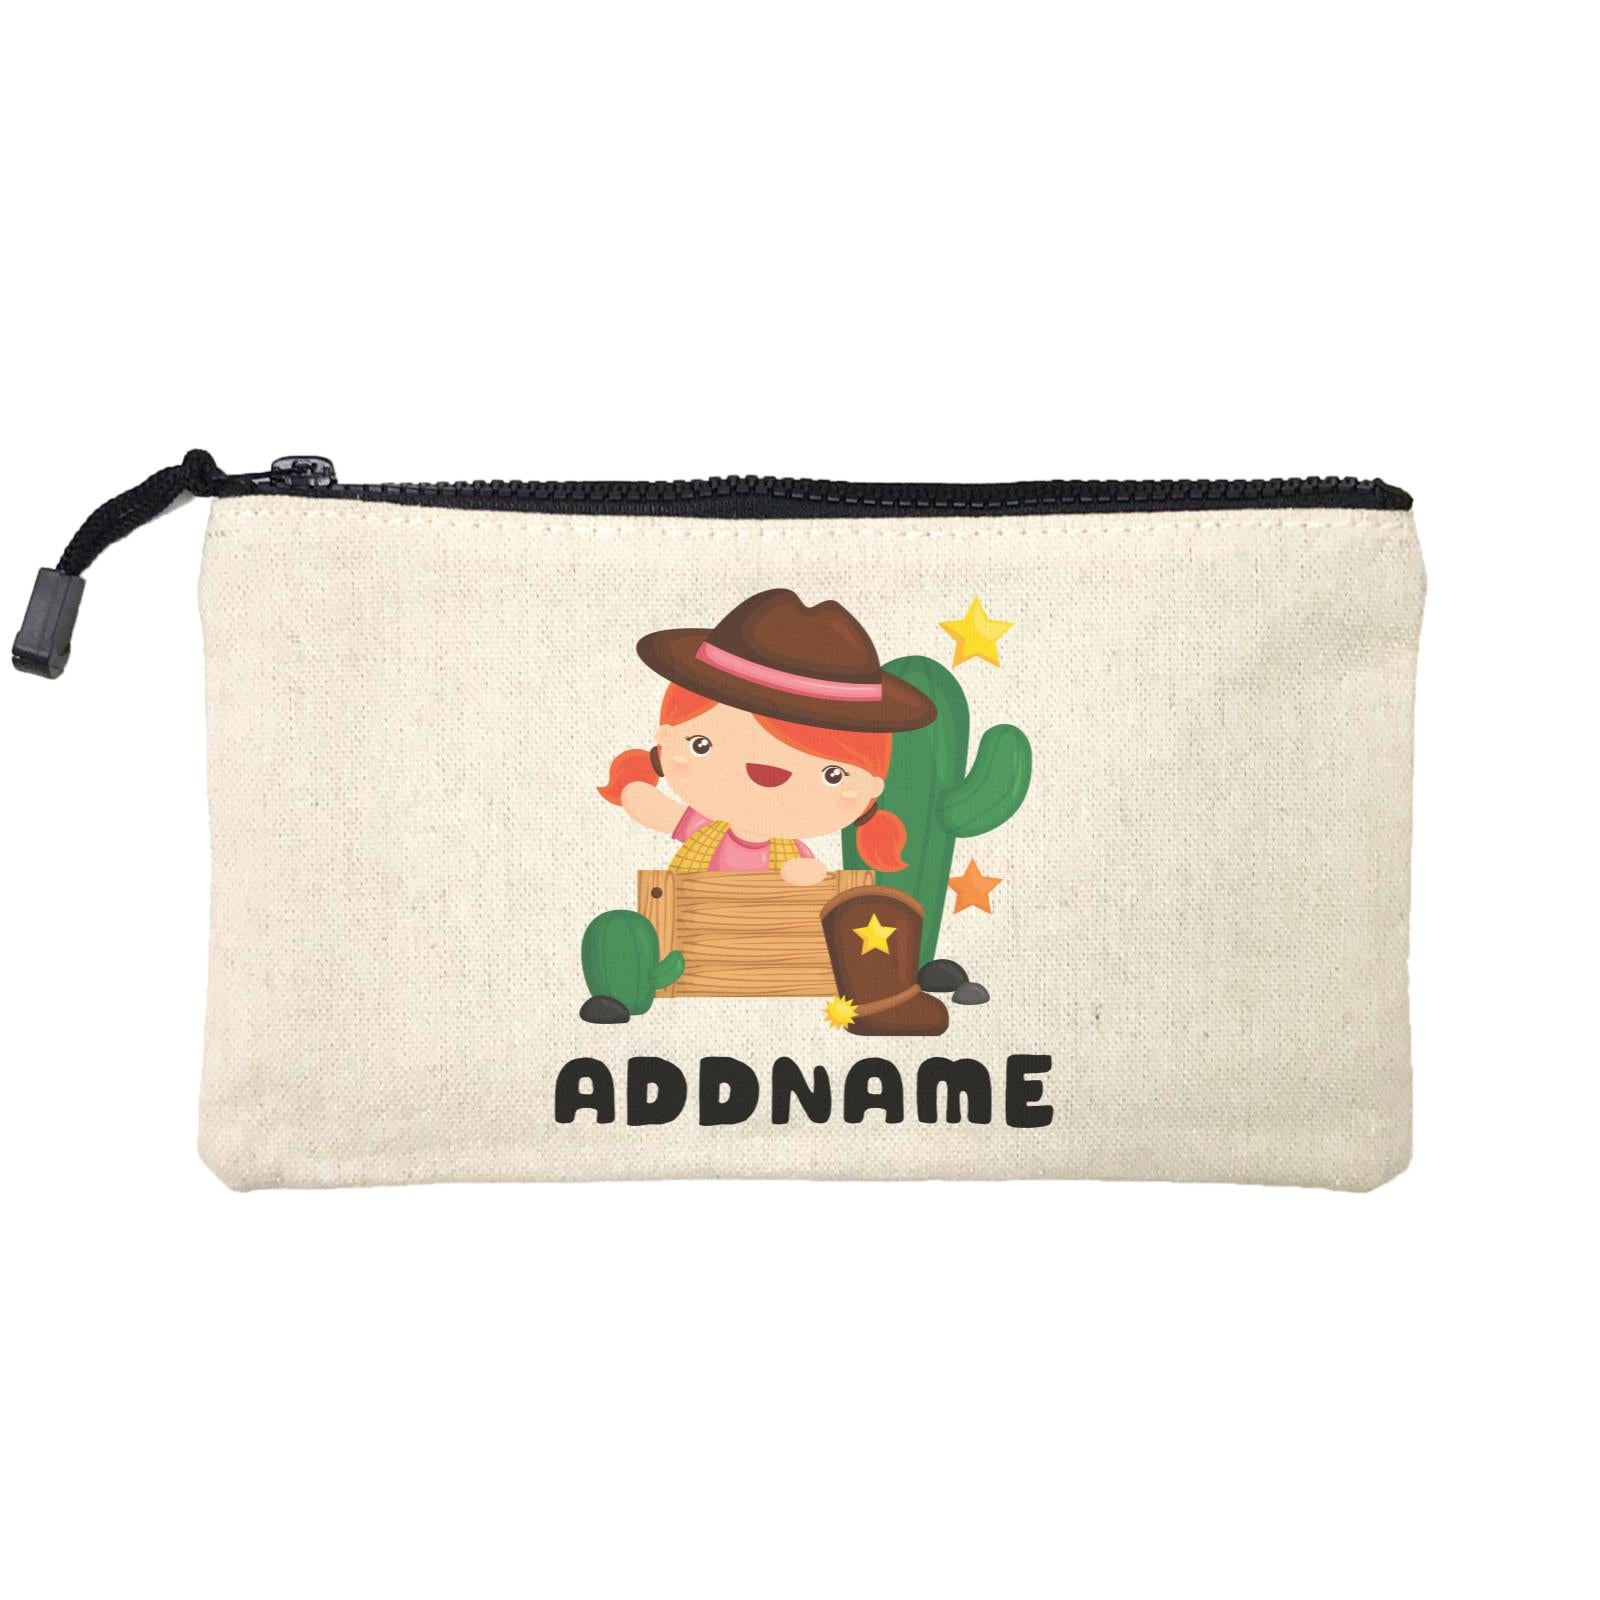 Birthday Cowboy Style Little Cowgirl Playing Wooden Box Addname Mini Accessories Stationery Pouch